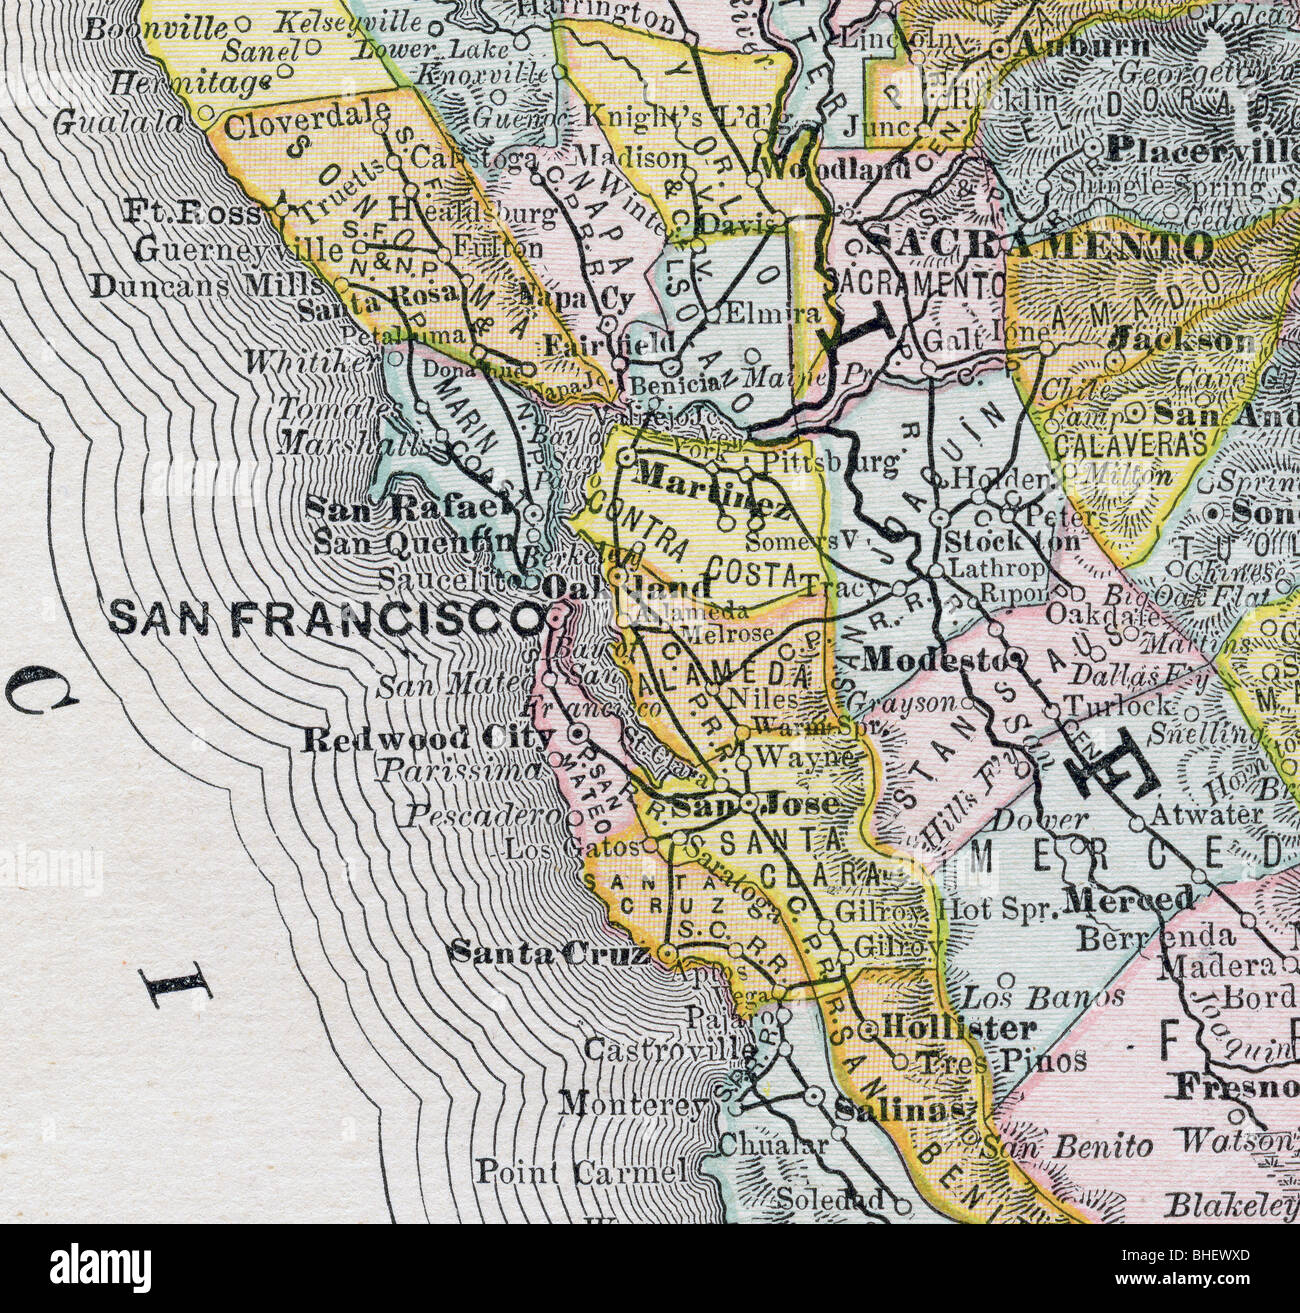 Old map of San Francisco Bay Area from original geography textbook, 1884 Stock Photo